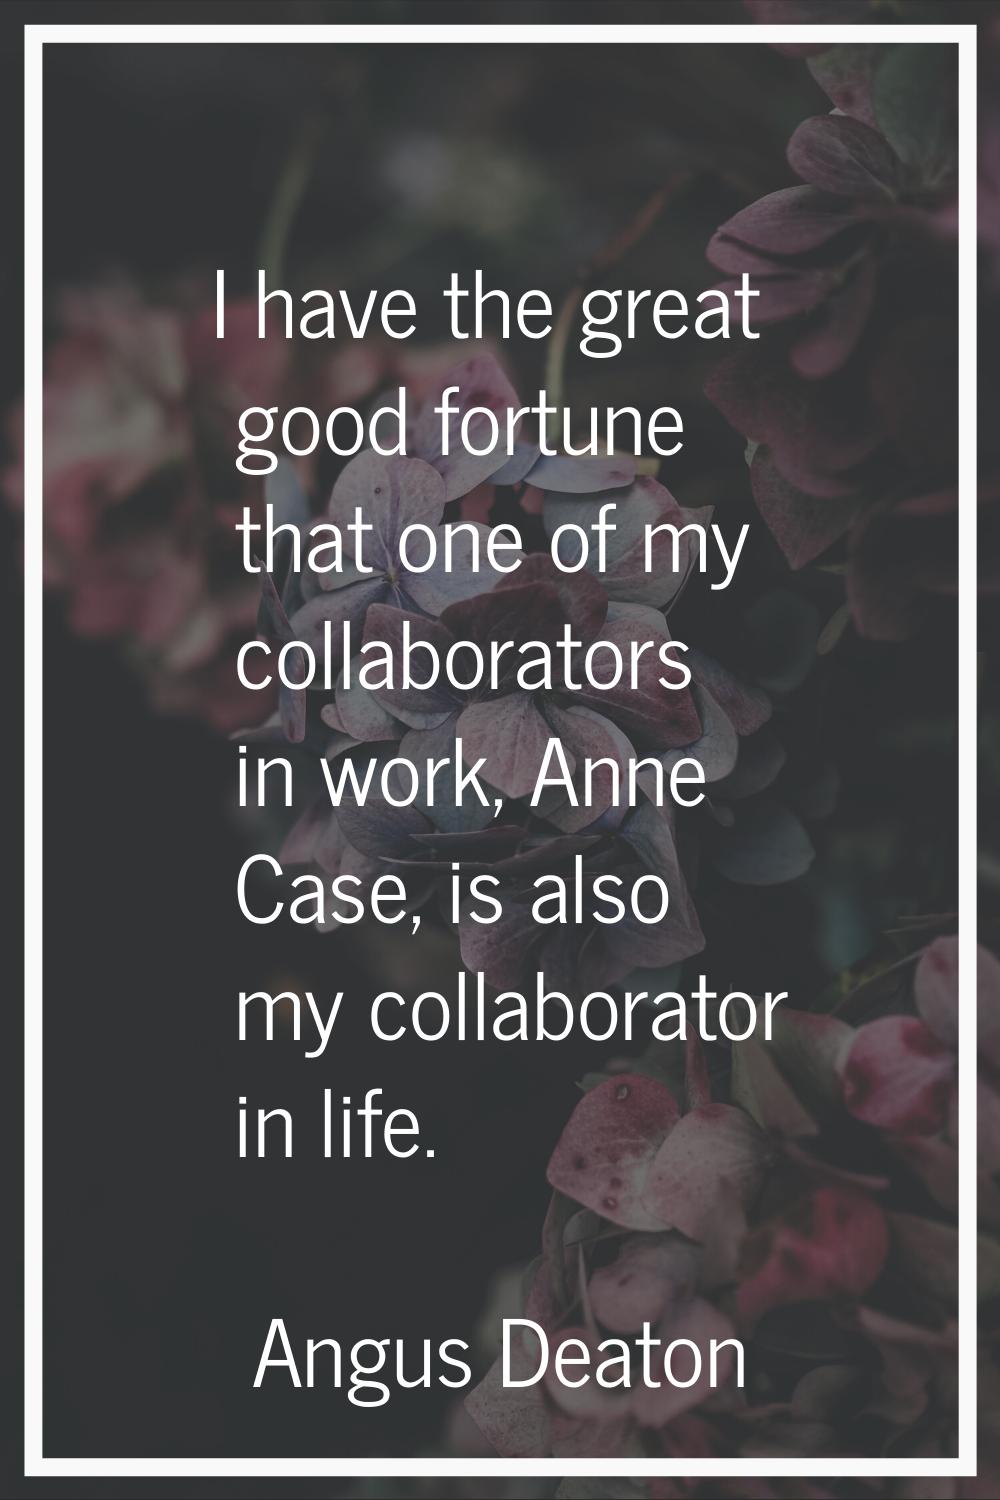 I have the great good fortune that one of my collaborators in work, Anne Case, is also my collabora